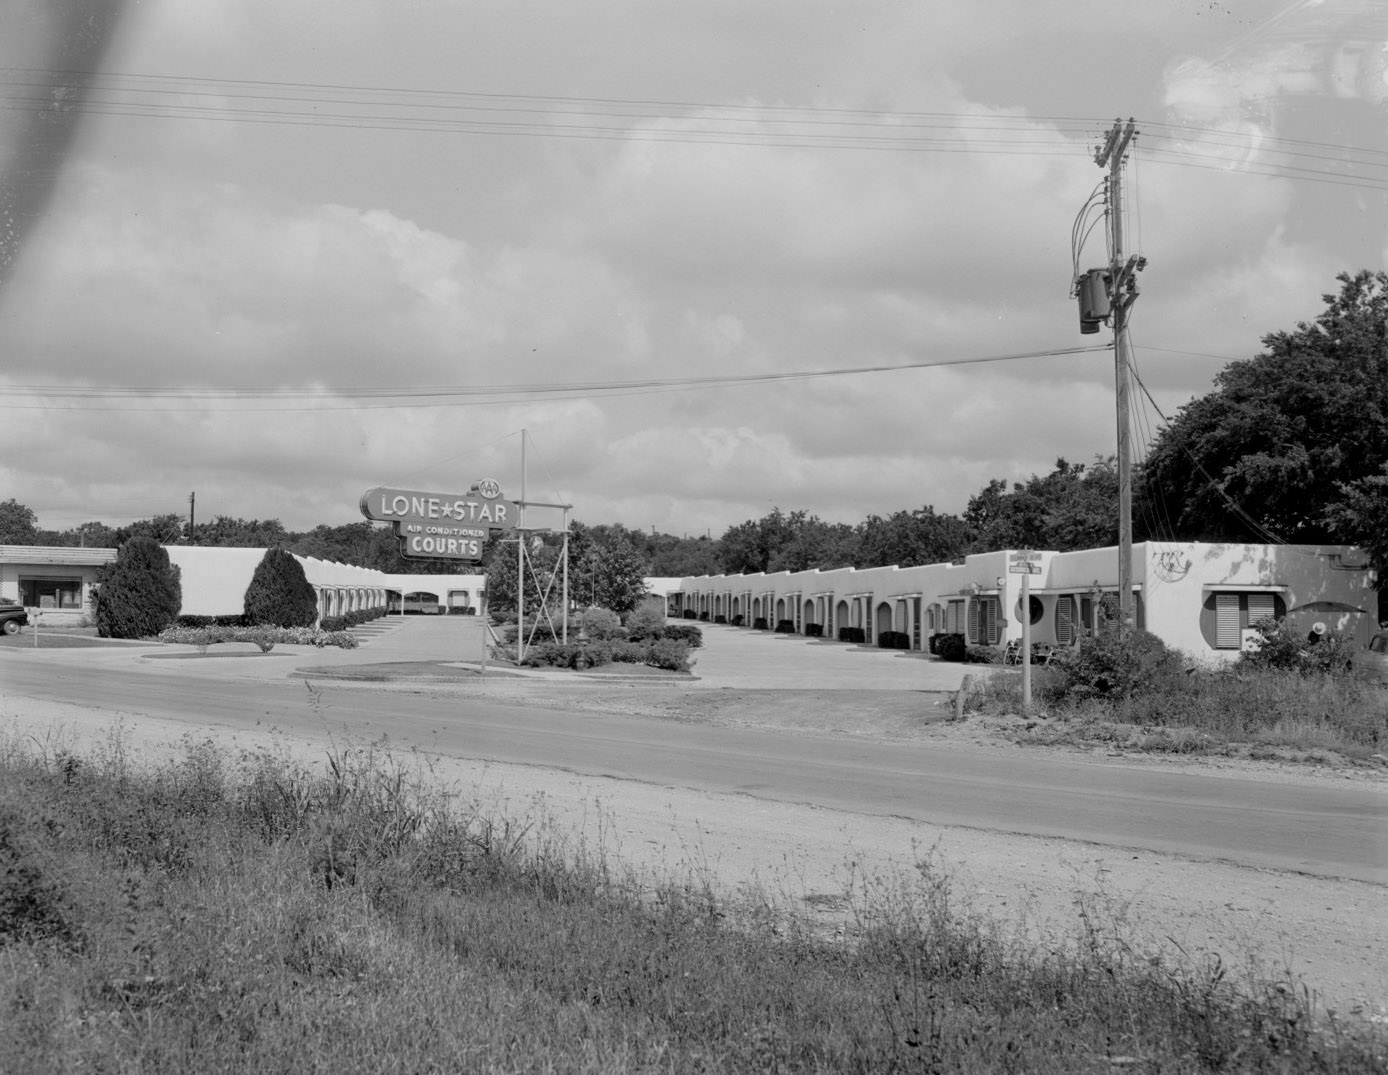 Exterior of Lone Star Courts Motel with Sign, 1954.